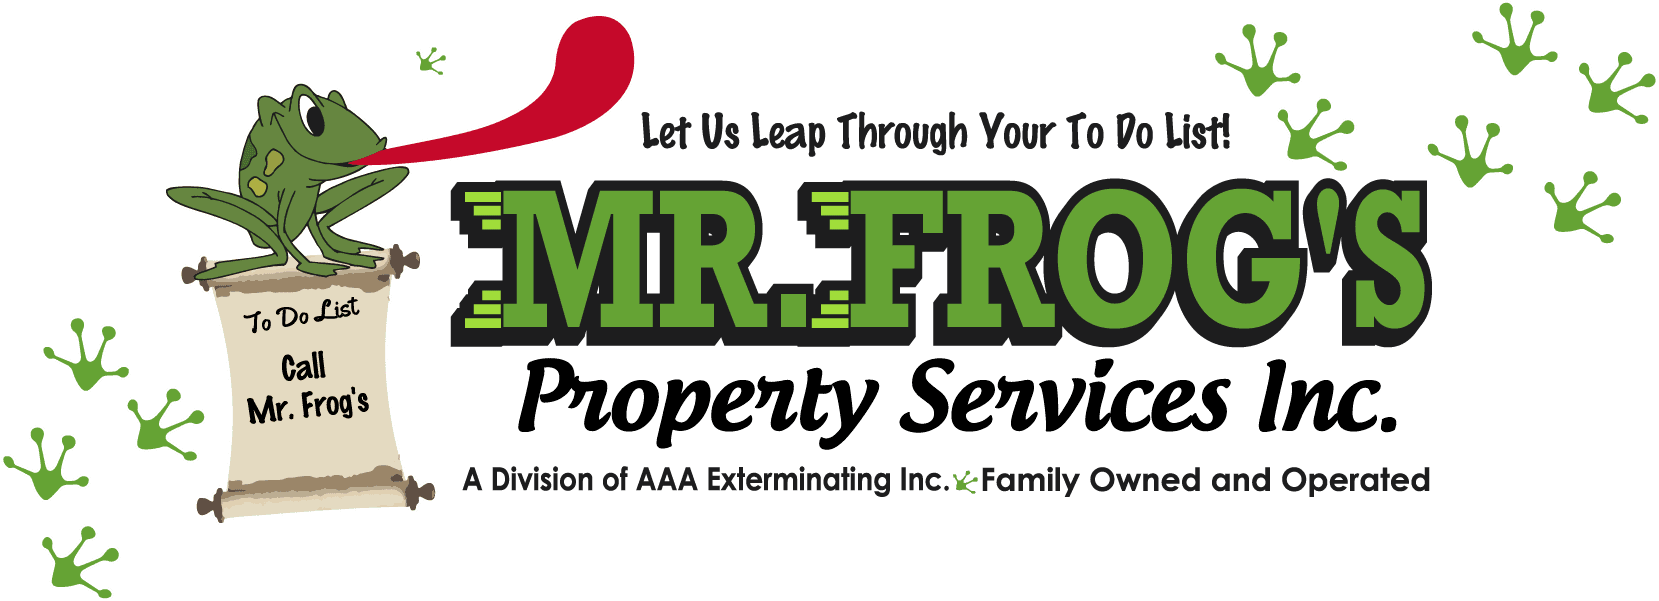 aaa-Mr-Frog-Property-Services-Indianapolis